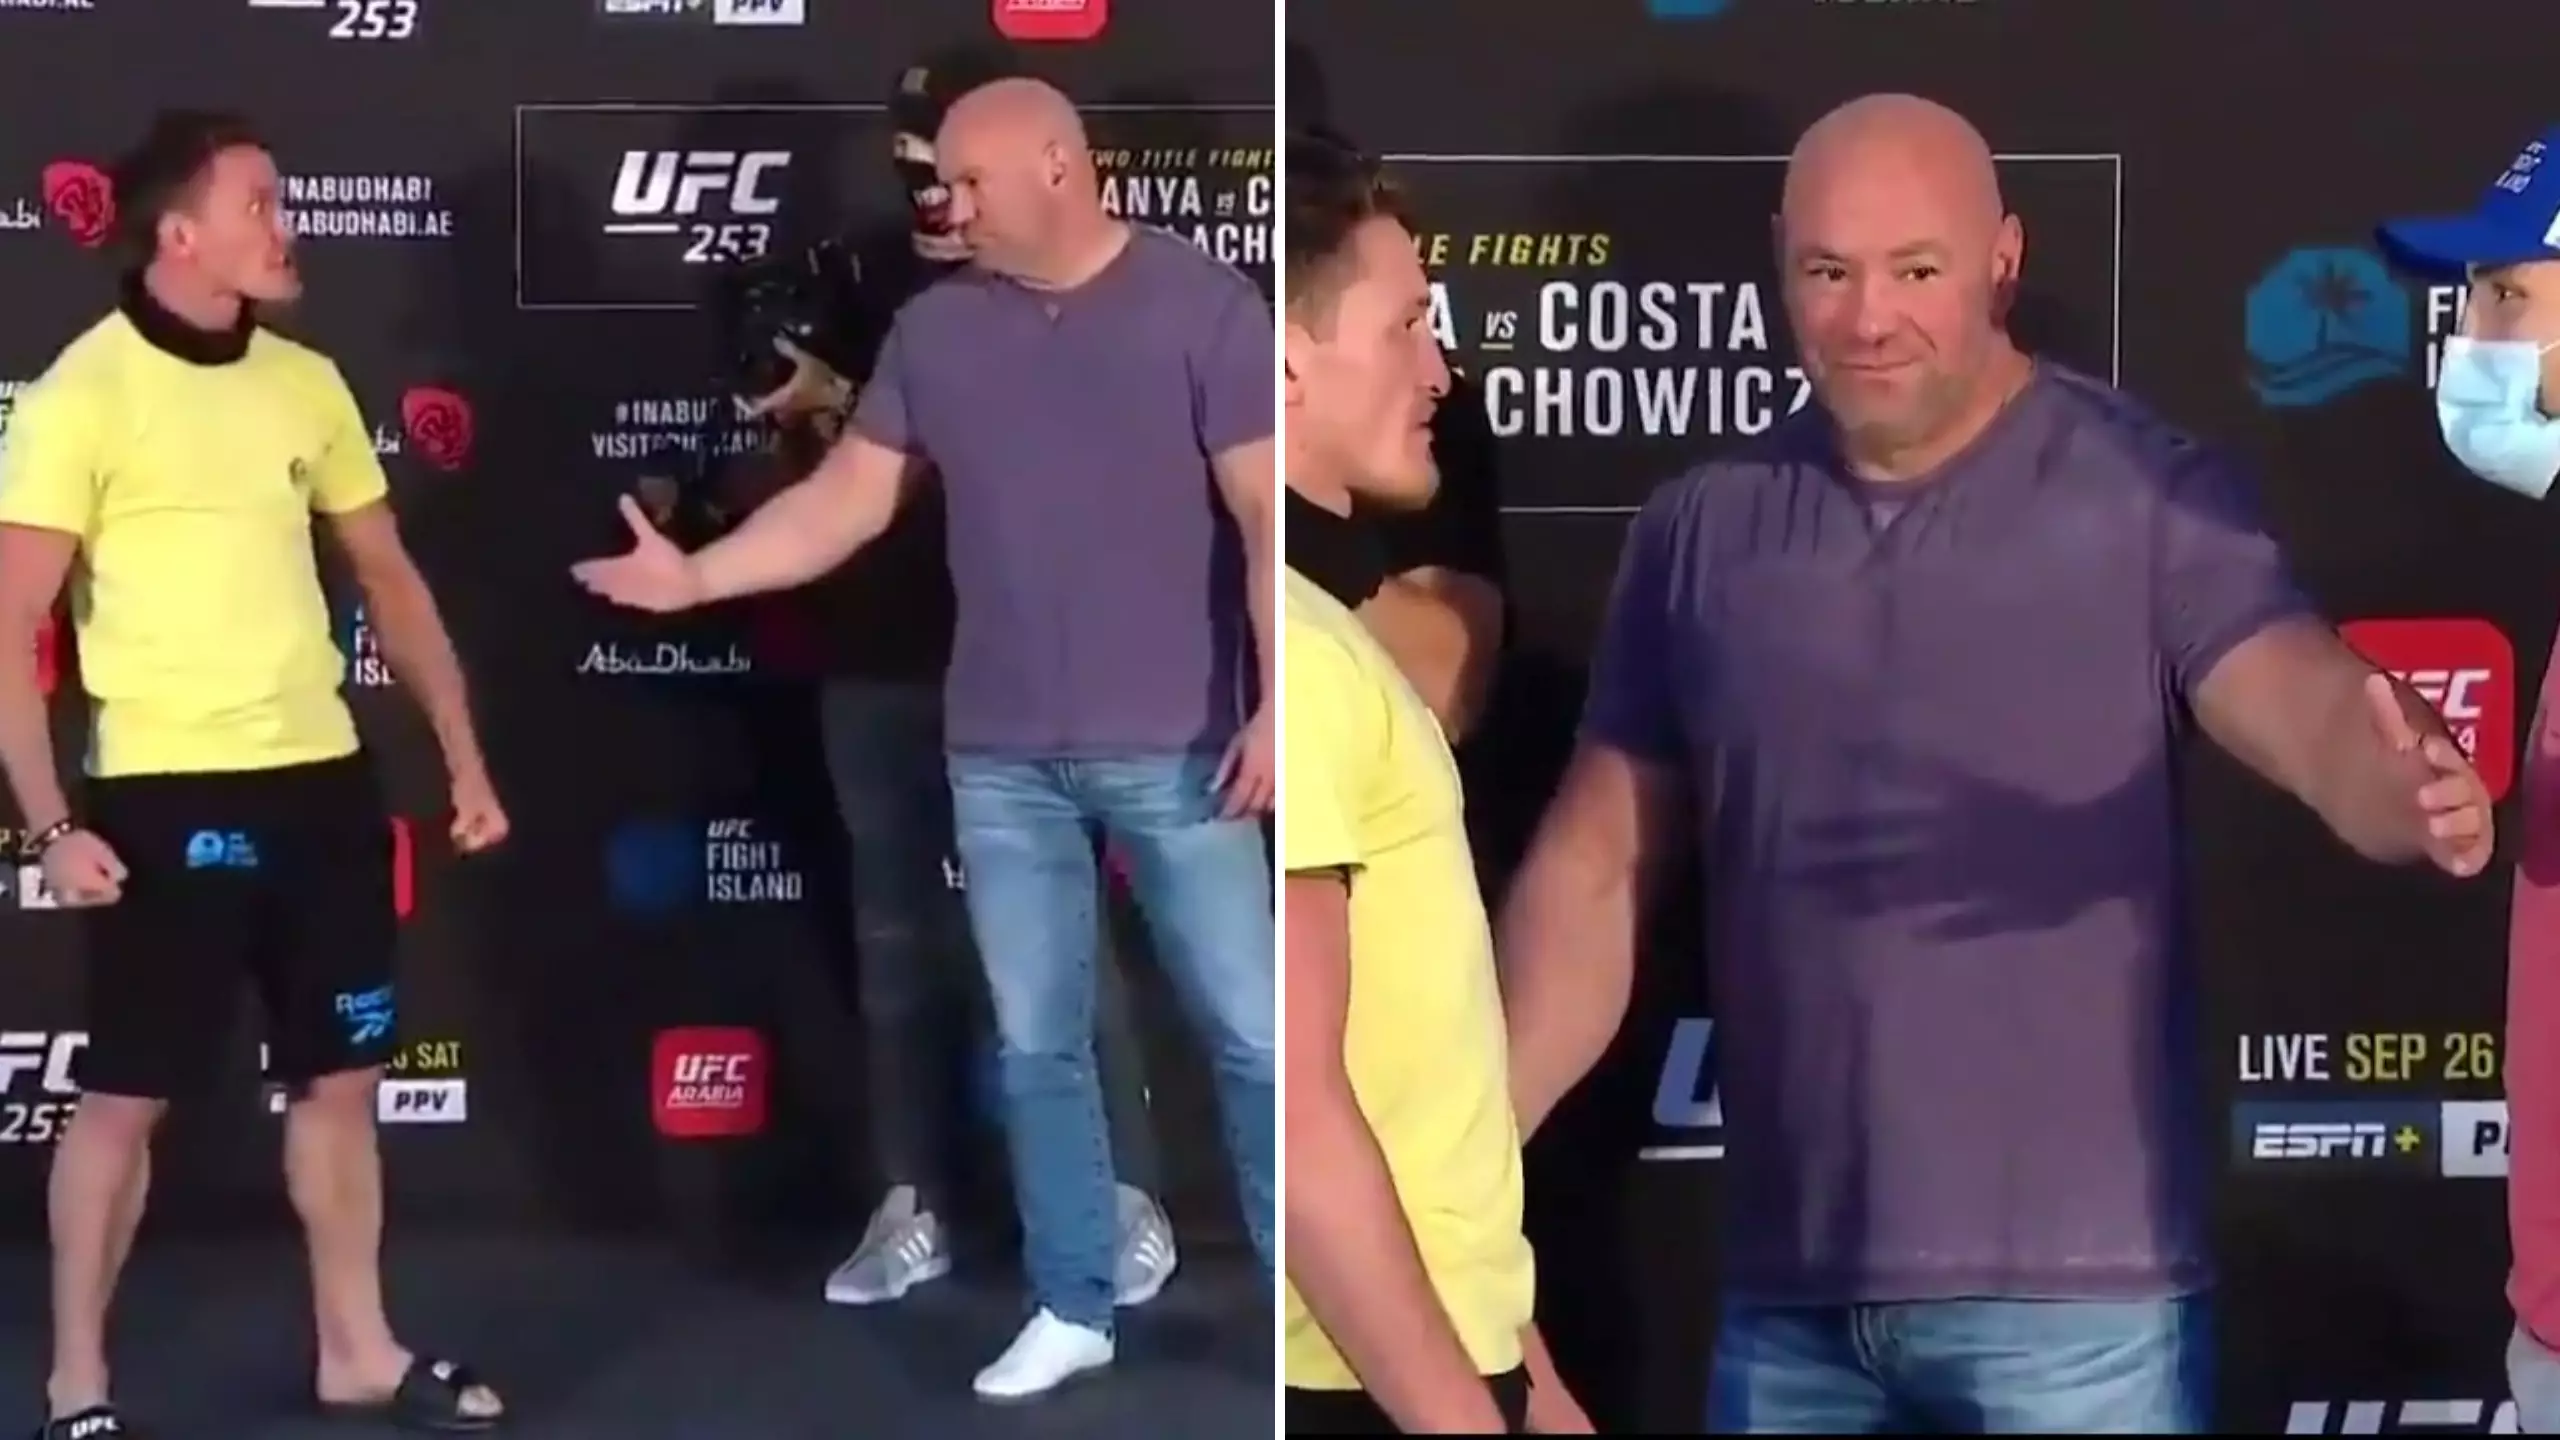 Dana White Left Completely Baffled By Haka During Awkward UFC 253 Weigh In Moment